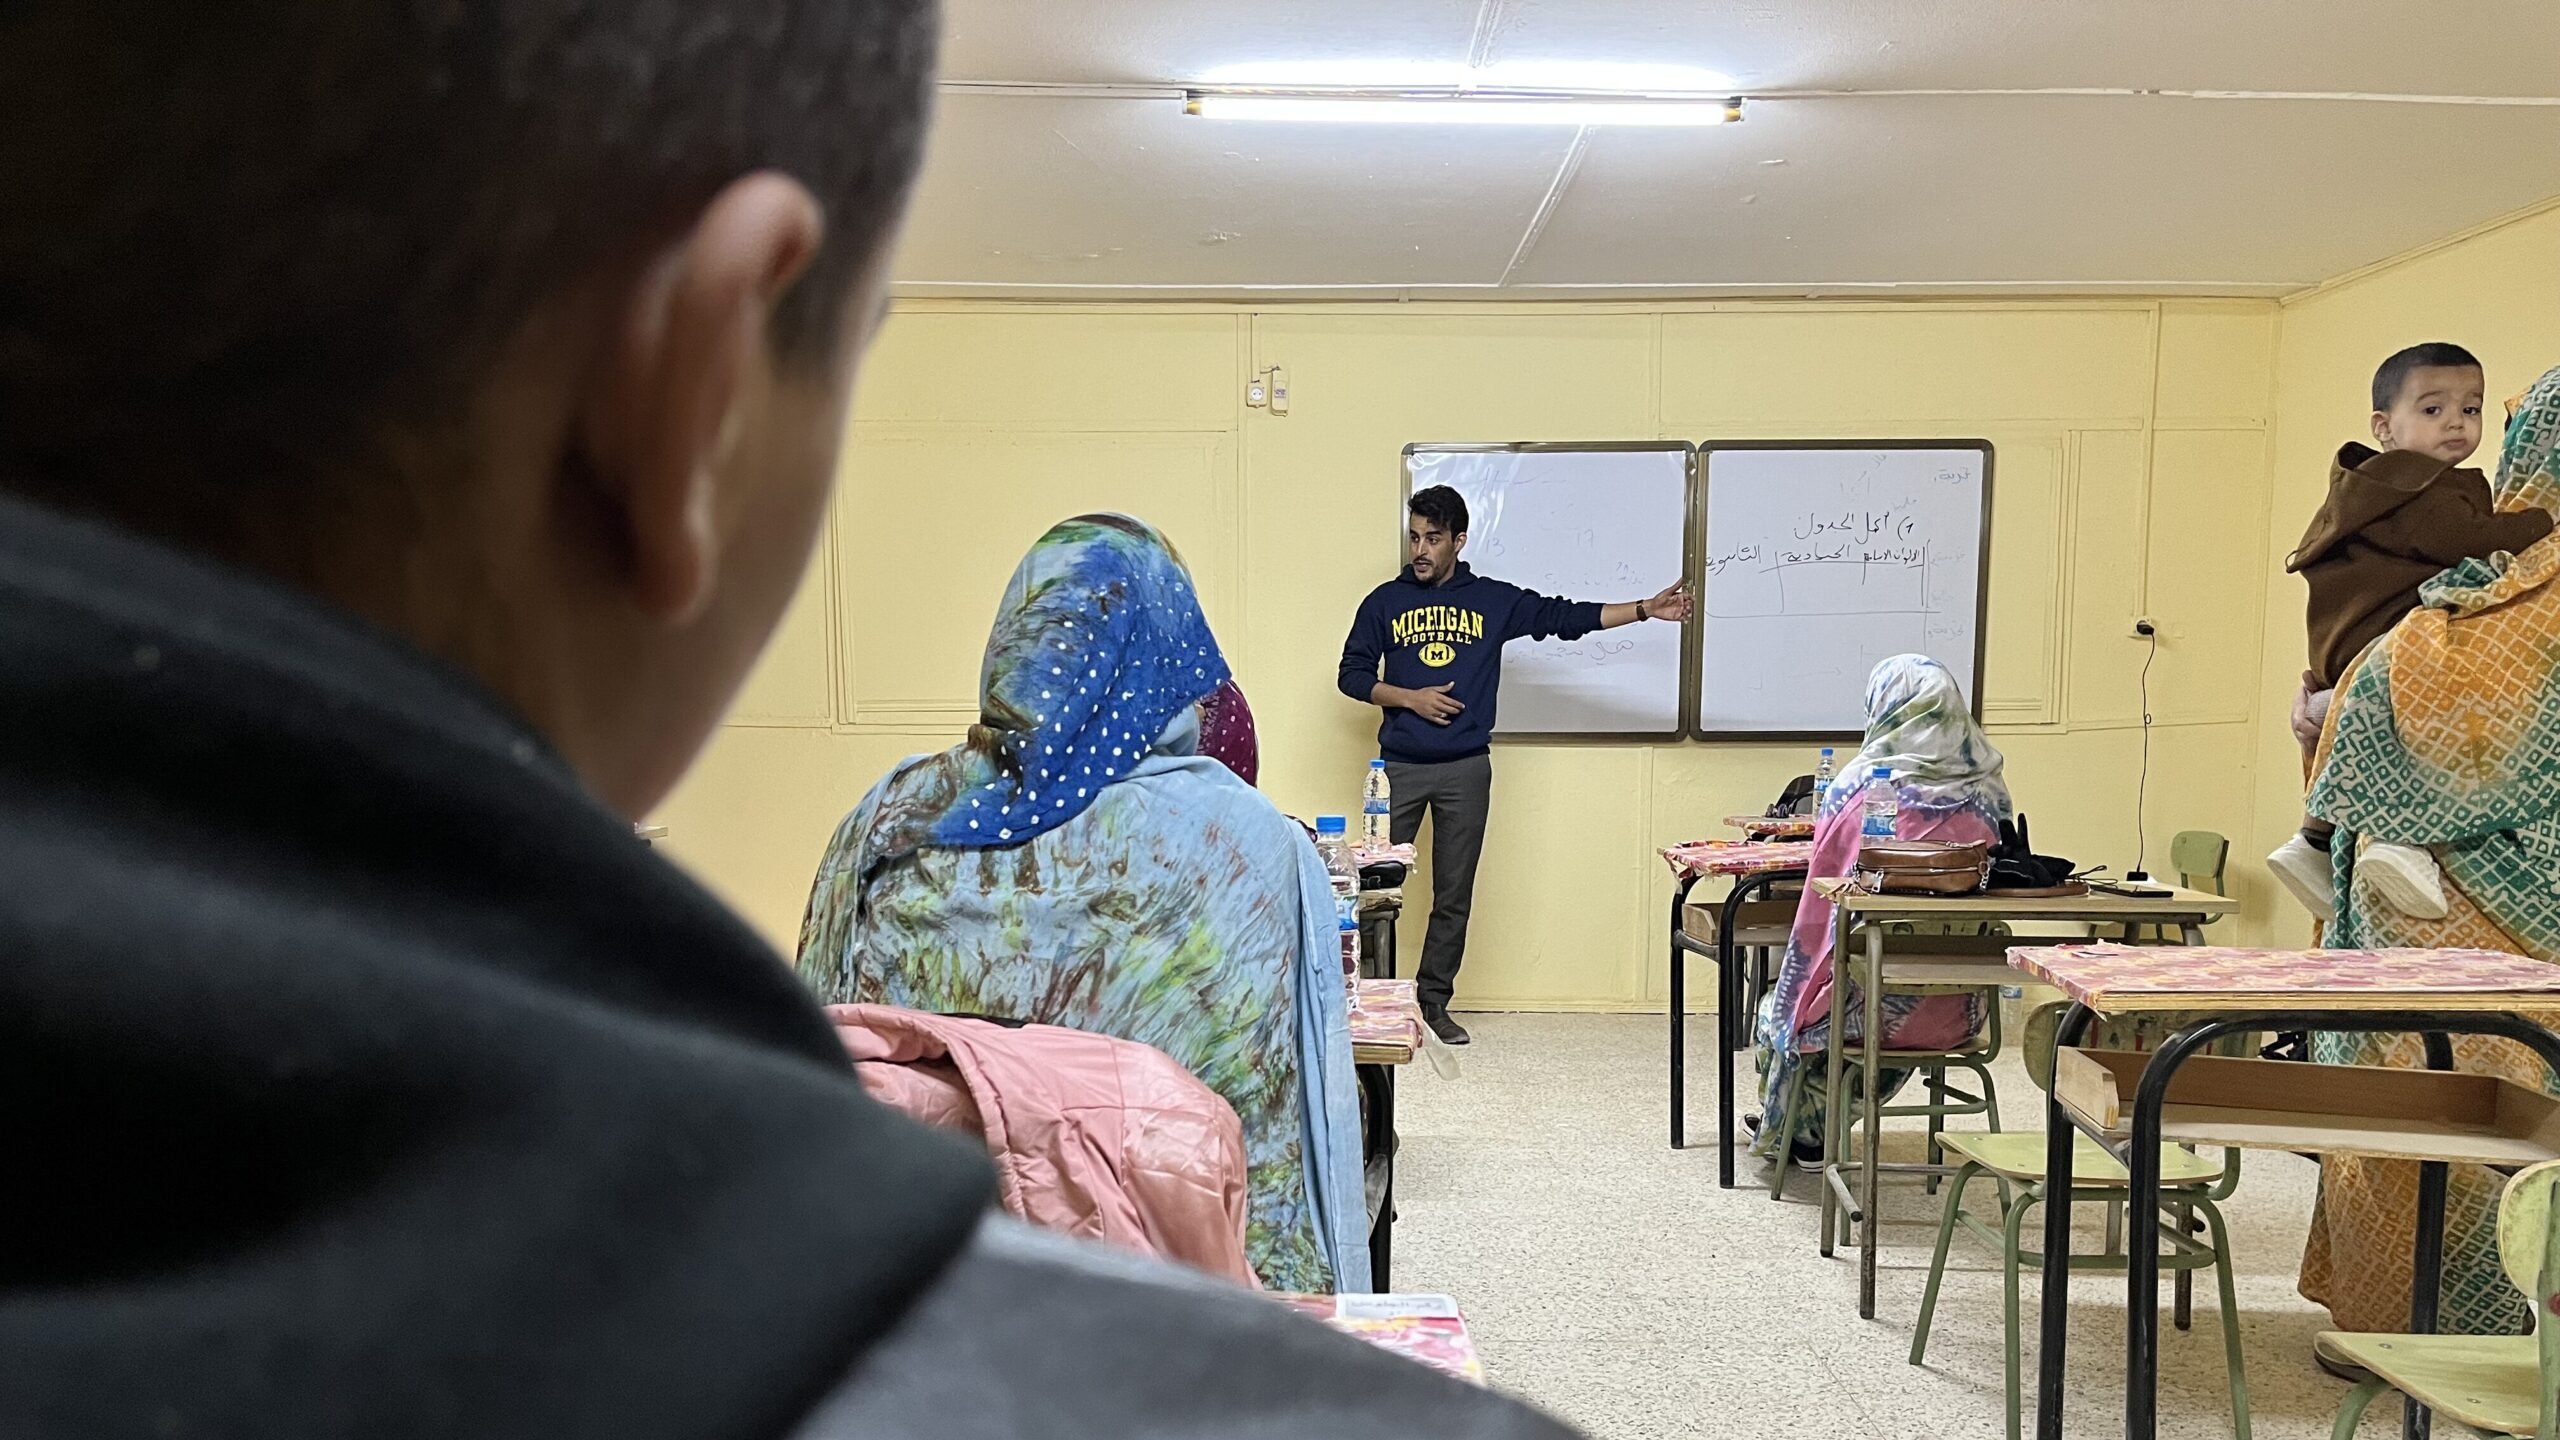 Bachir standing at the front of a classroom, presenting on UWC scholarship opportunities. Students and parents sit facing Bachir.